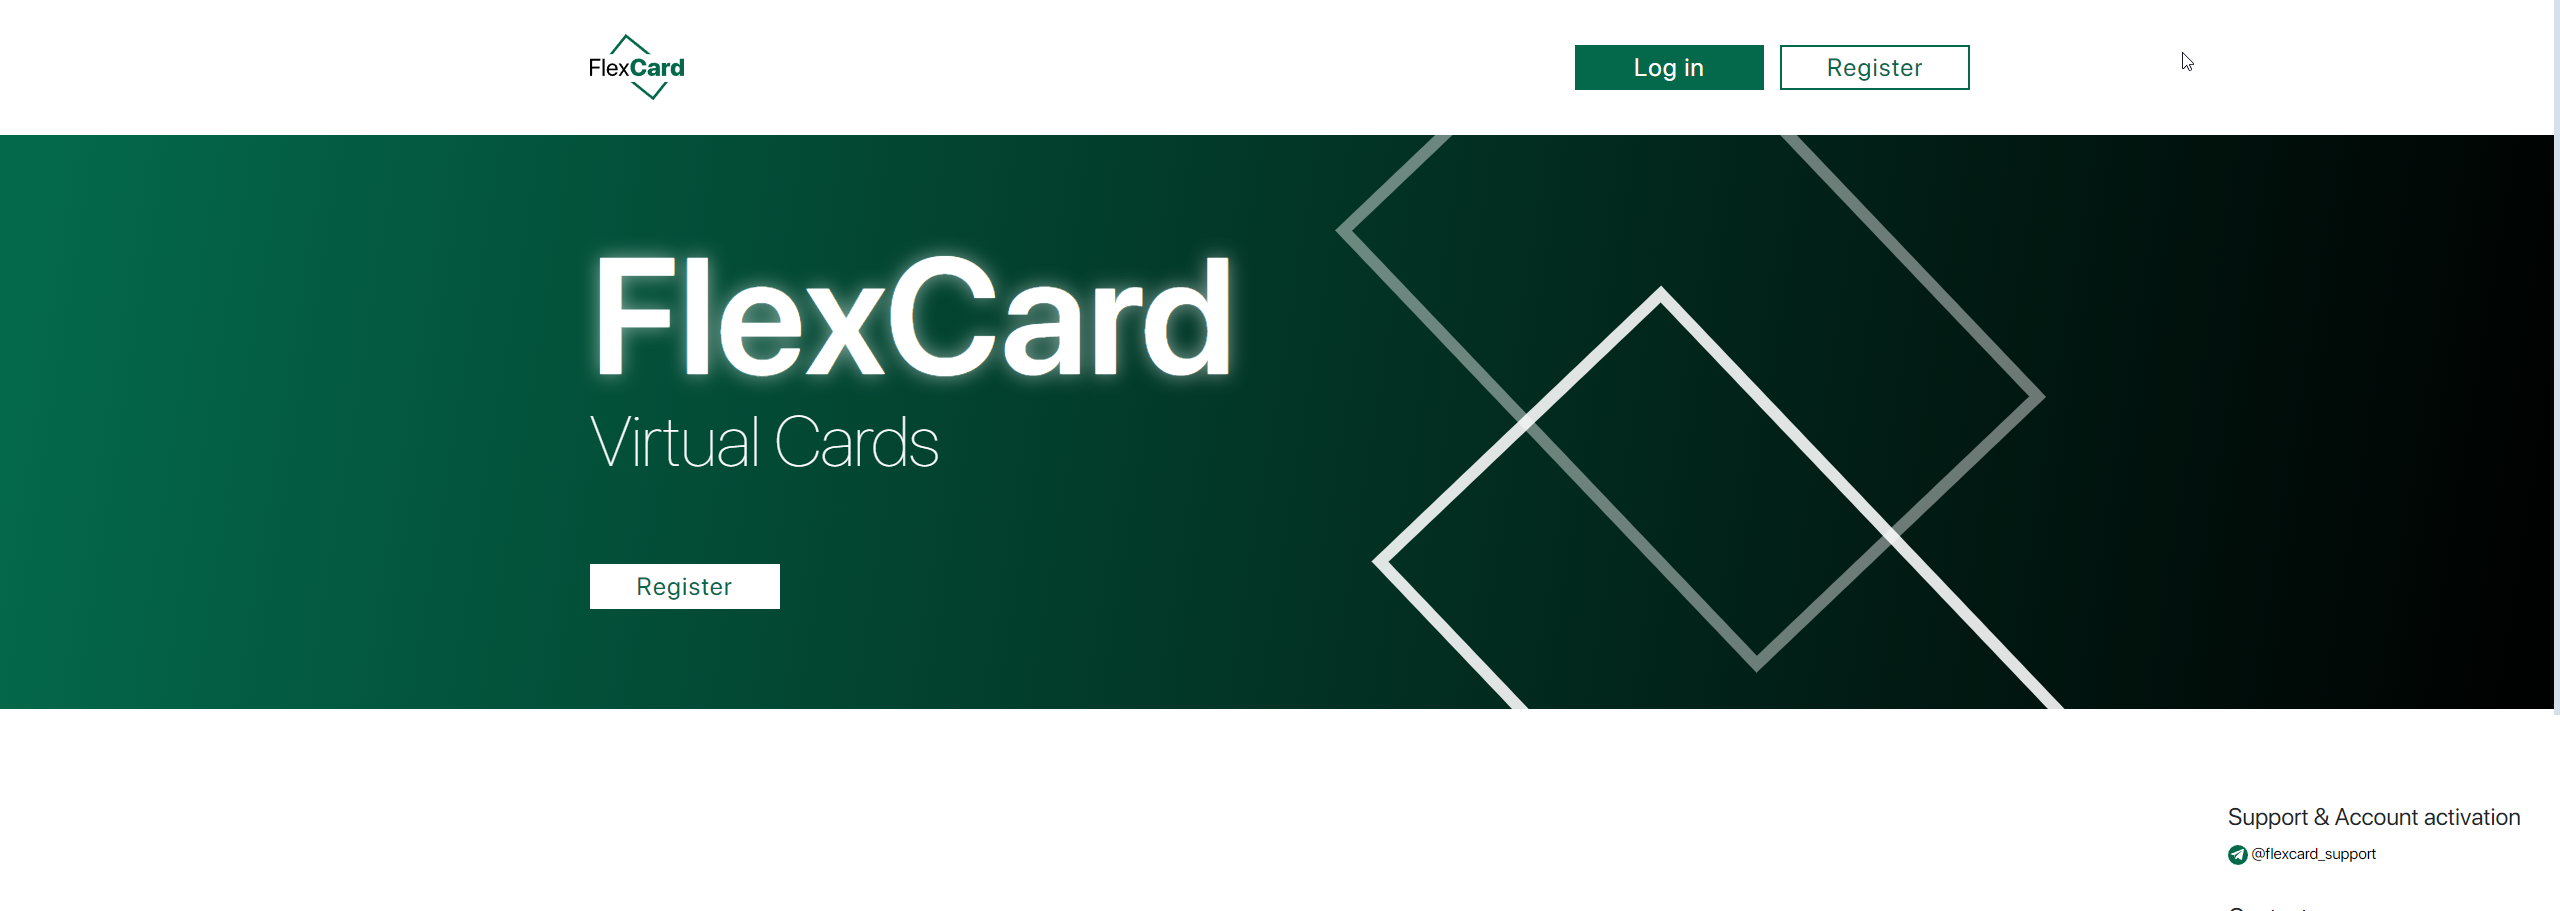 FlexCard - cheap virtual cards for affiliate marketing 